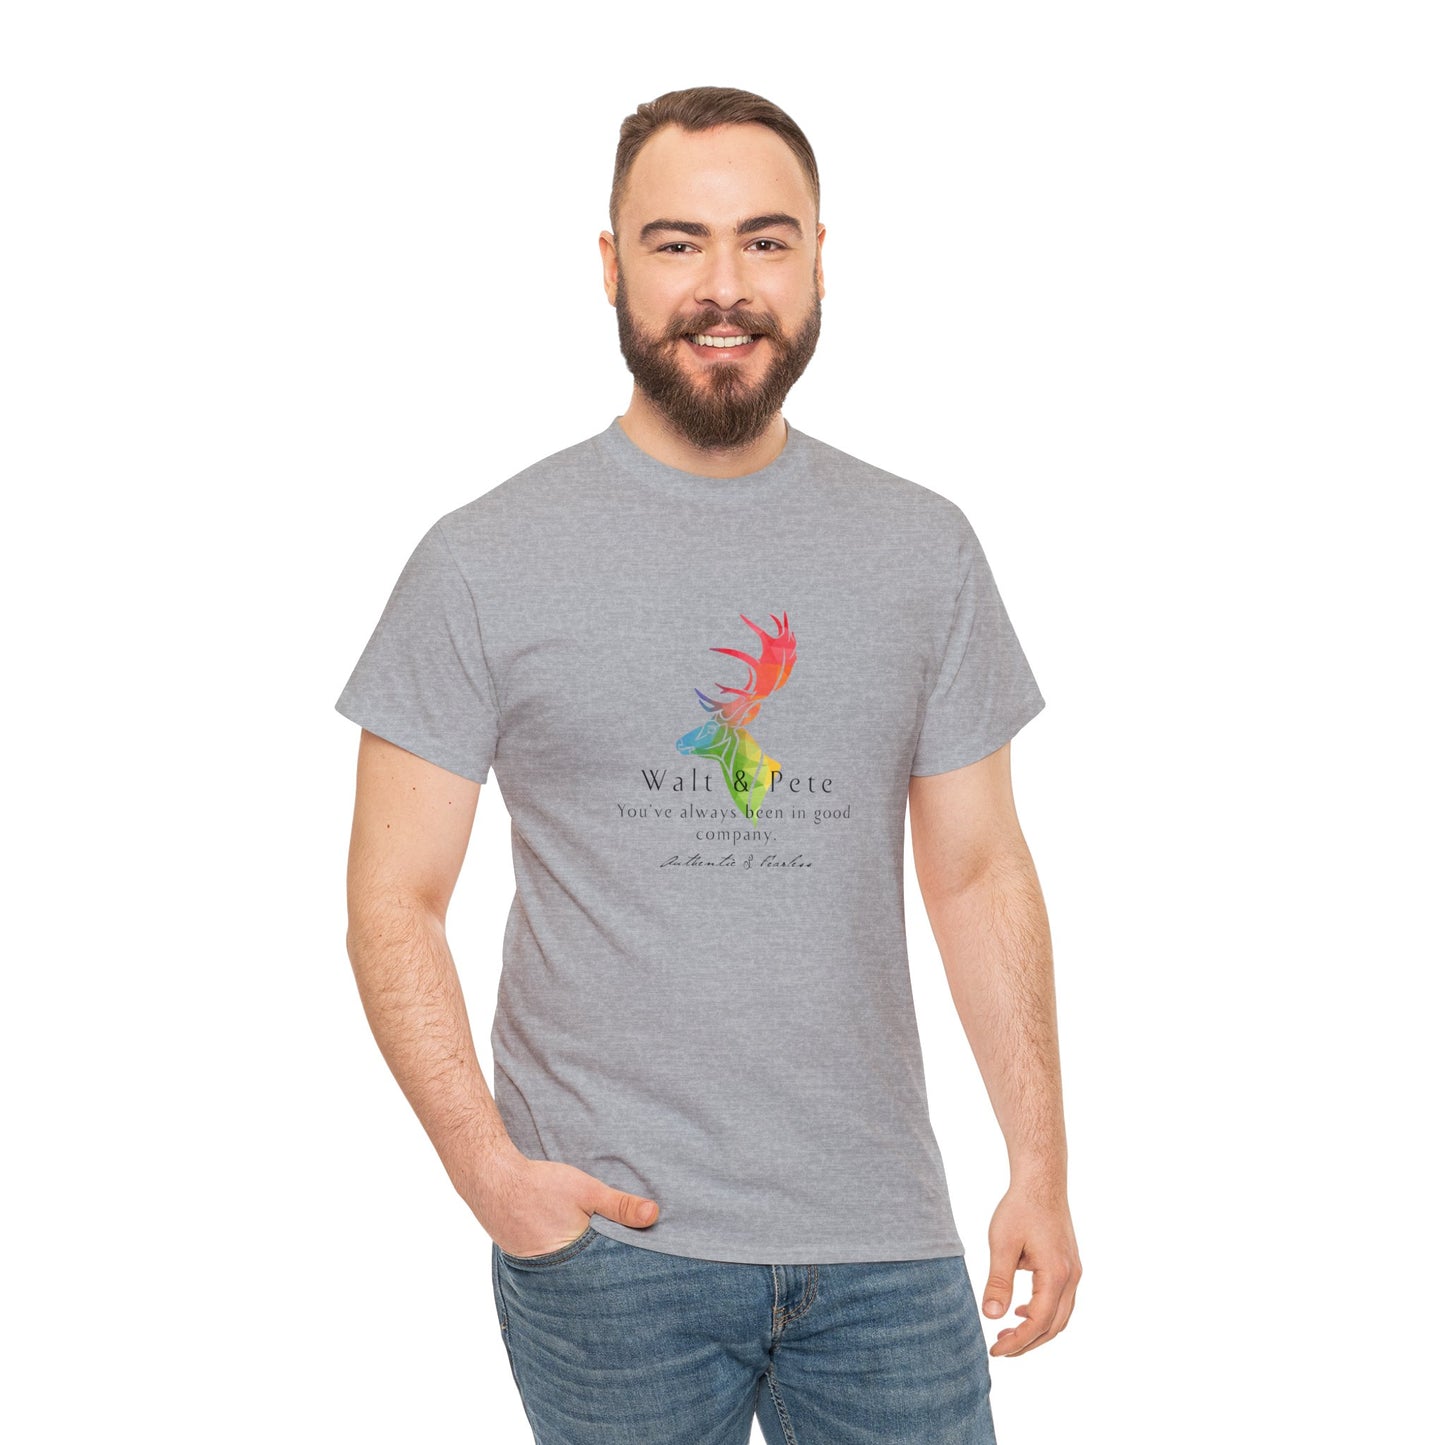 Walt & Pete - You've always been in good company - Authentic & Fearless | Graphic T-Shirt